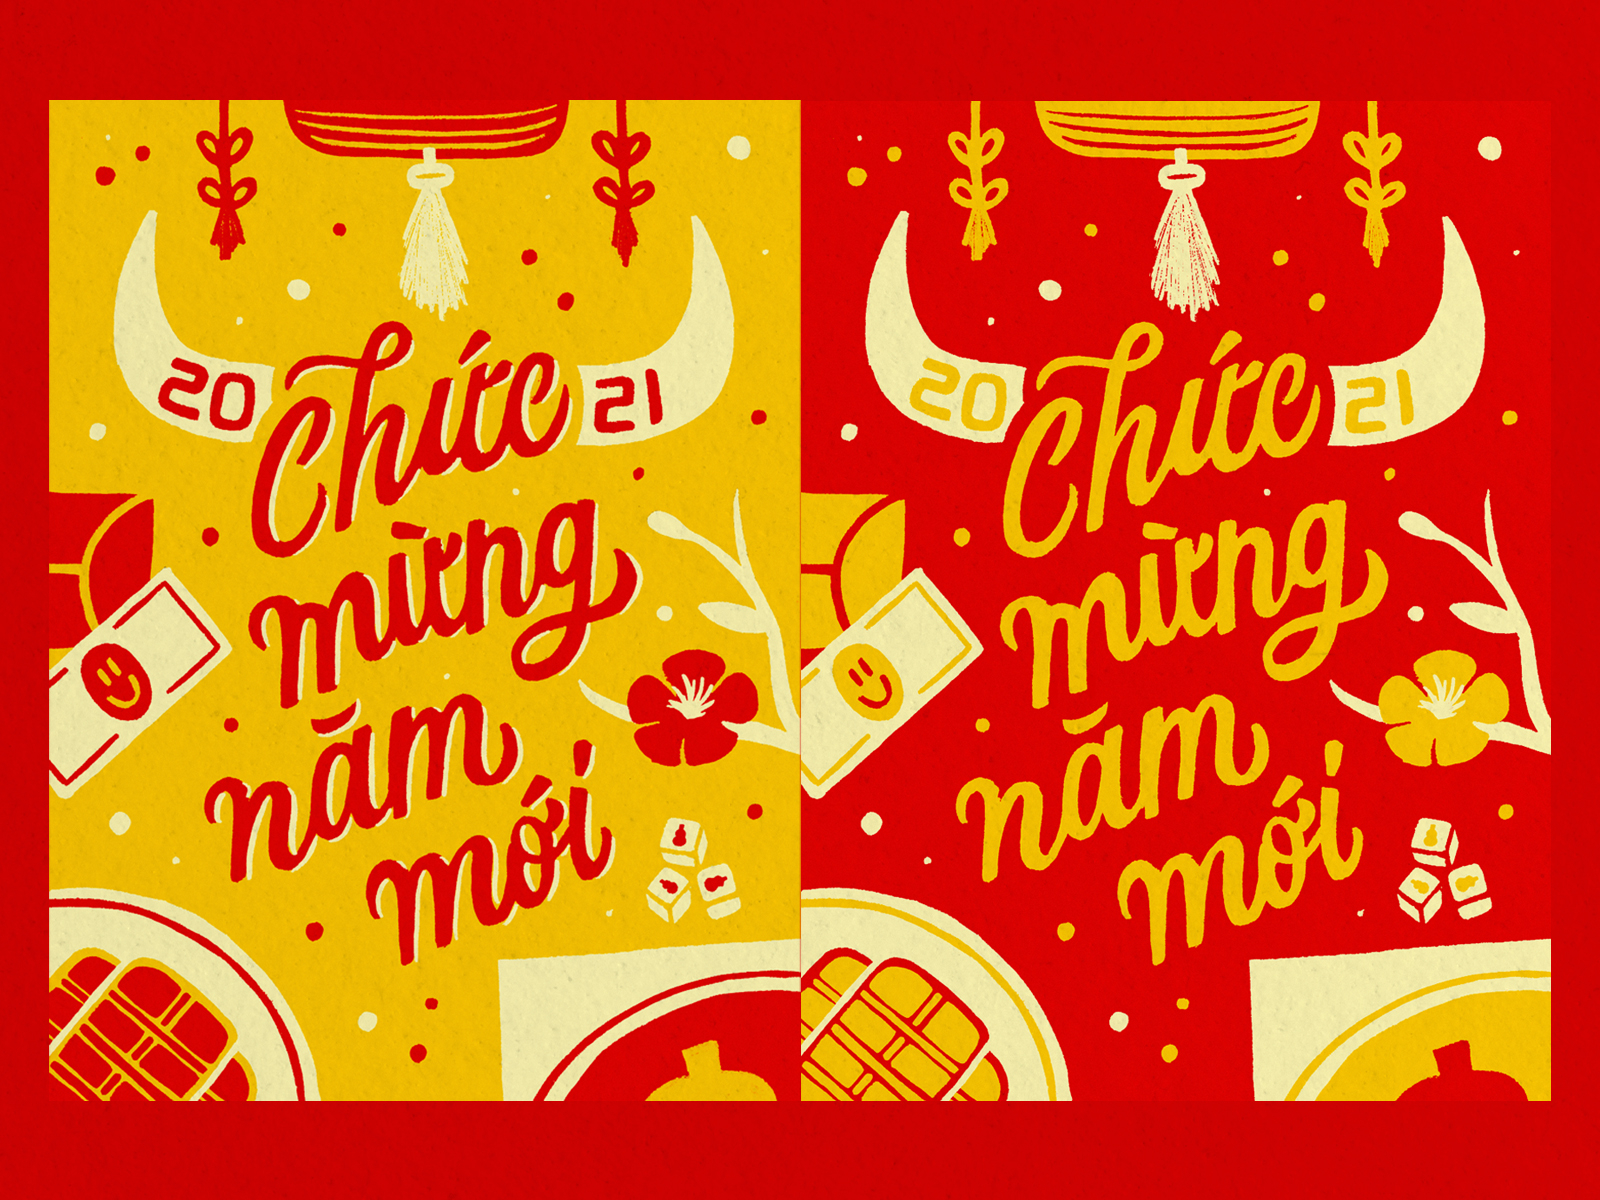 Lunar New Year 2021 banh tet year of the ox 2021 logo chuc mung nam moi lunar new year illustration handlettering lettering design